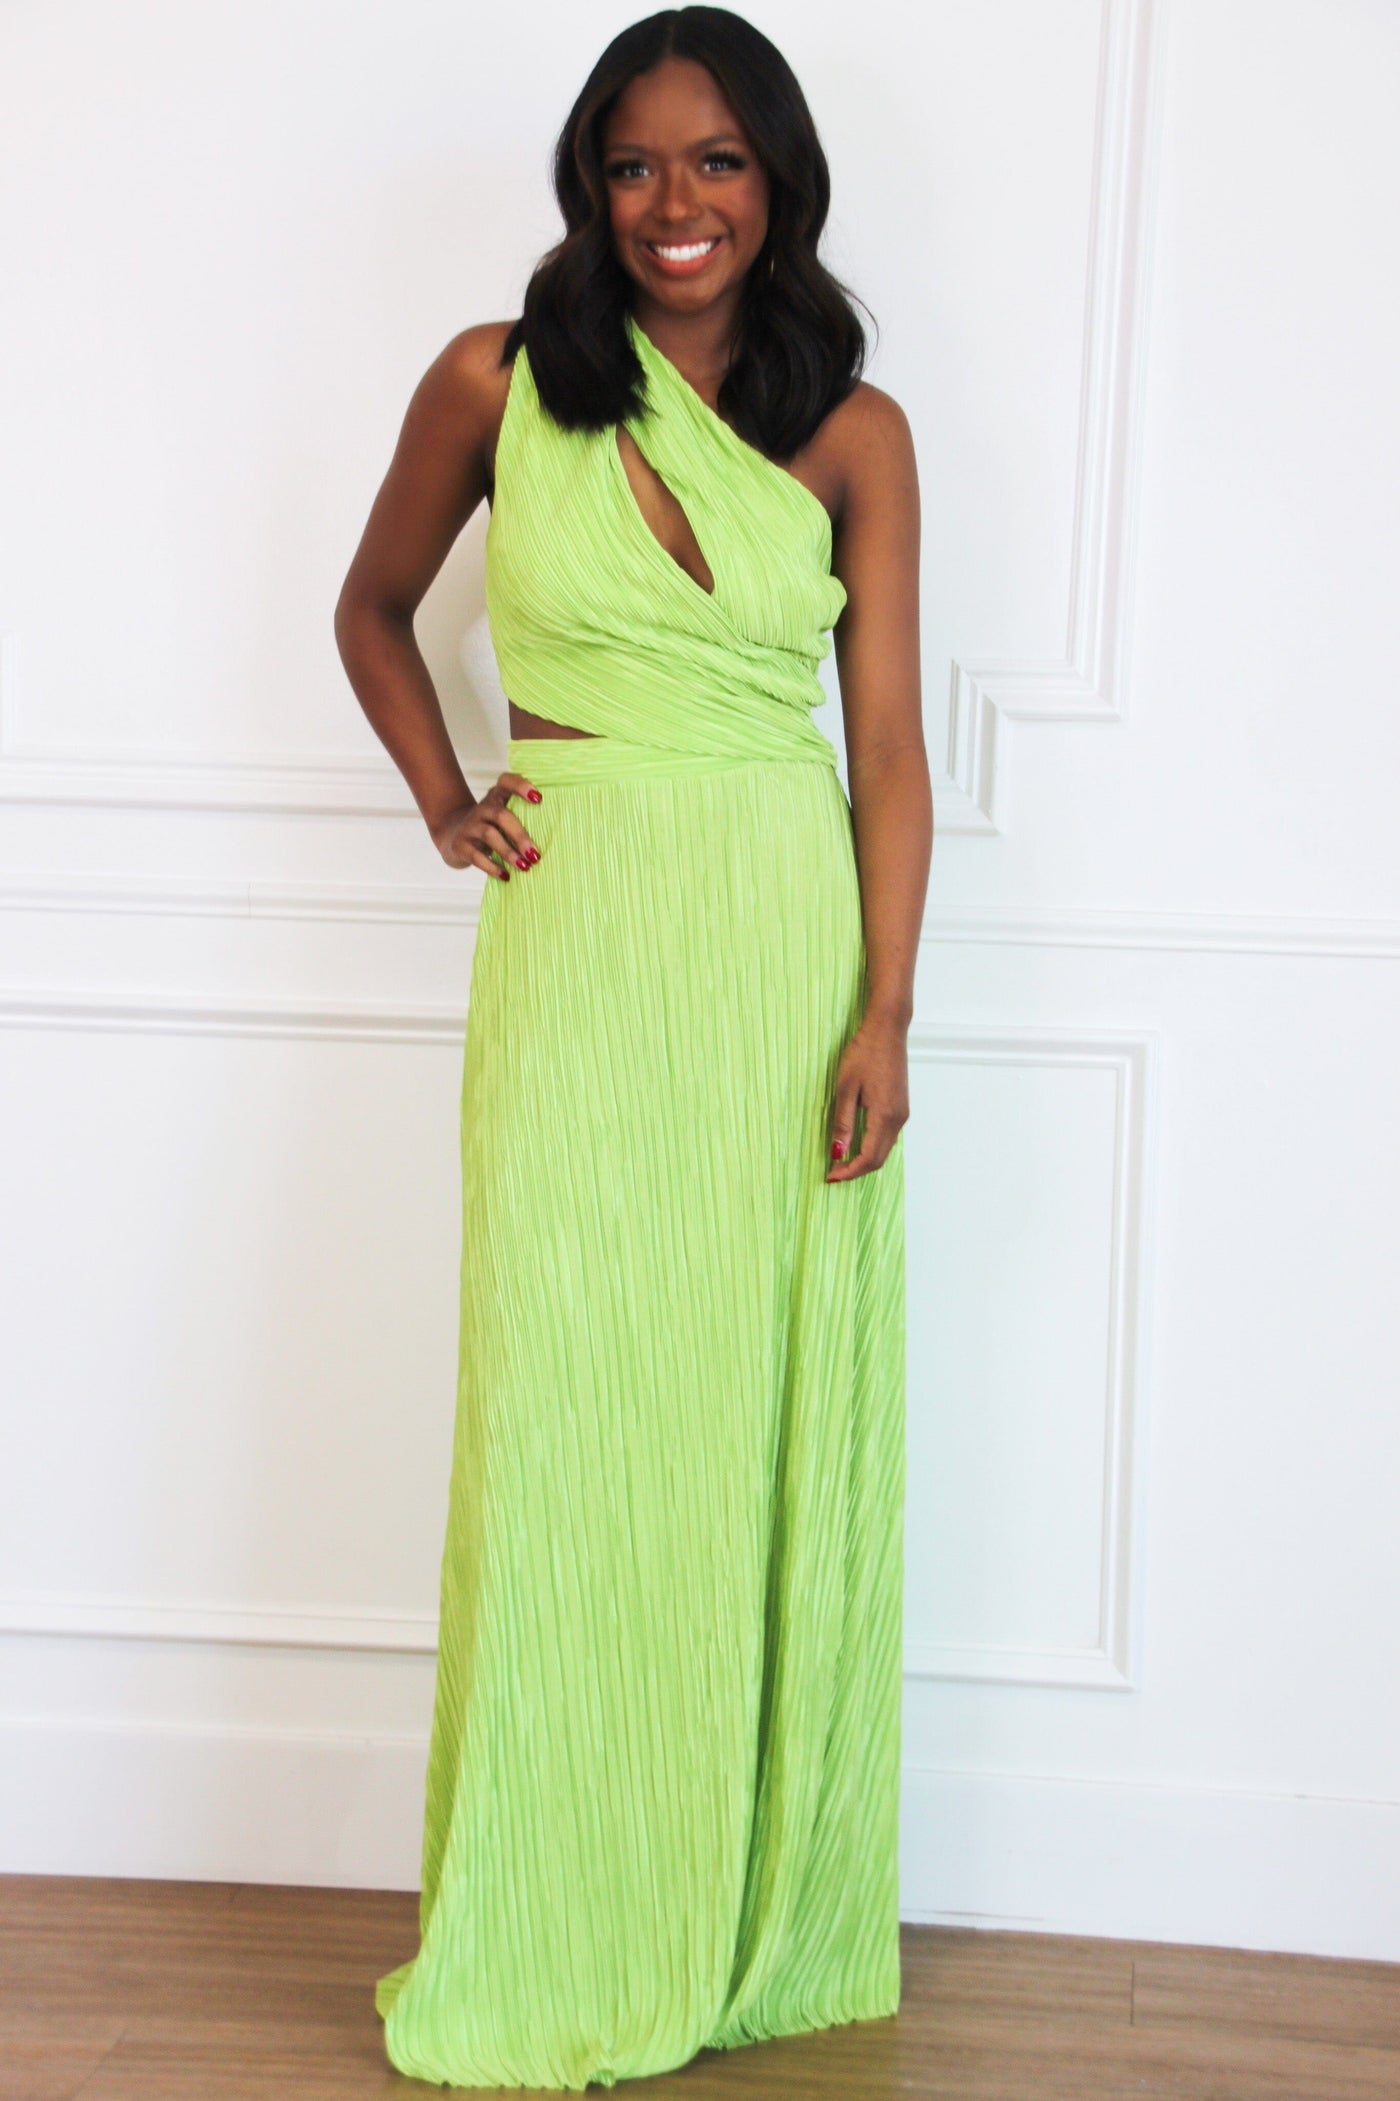 Kristen One Shoulder Cutout Pleated Maxi Dress: Bright Lime - Bella and Bloom Boutique